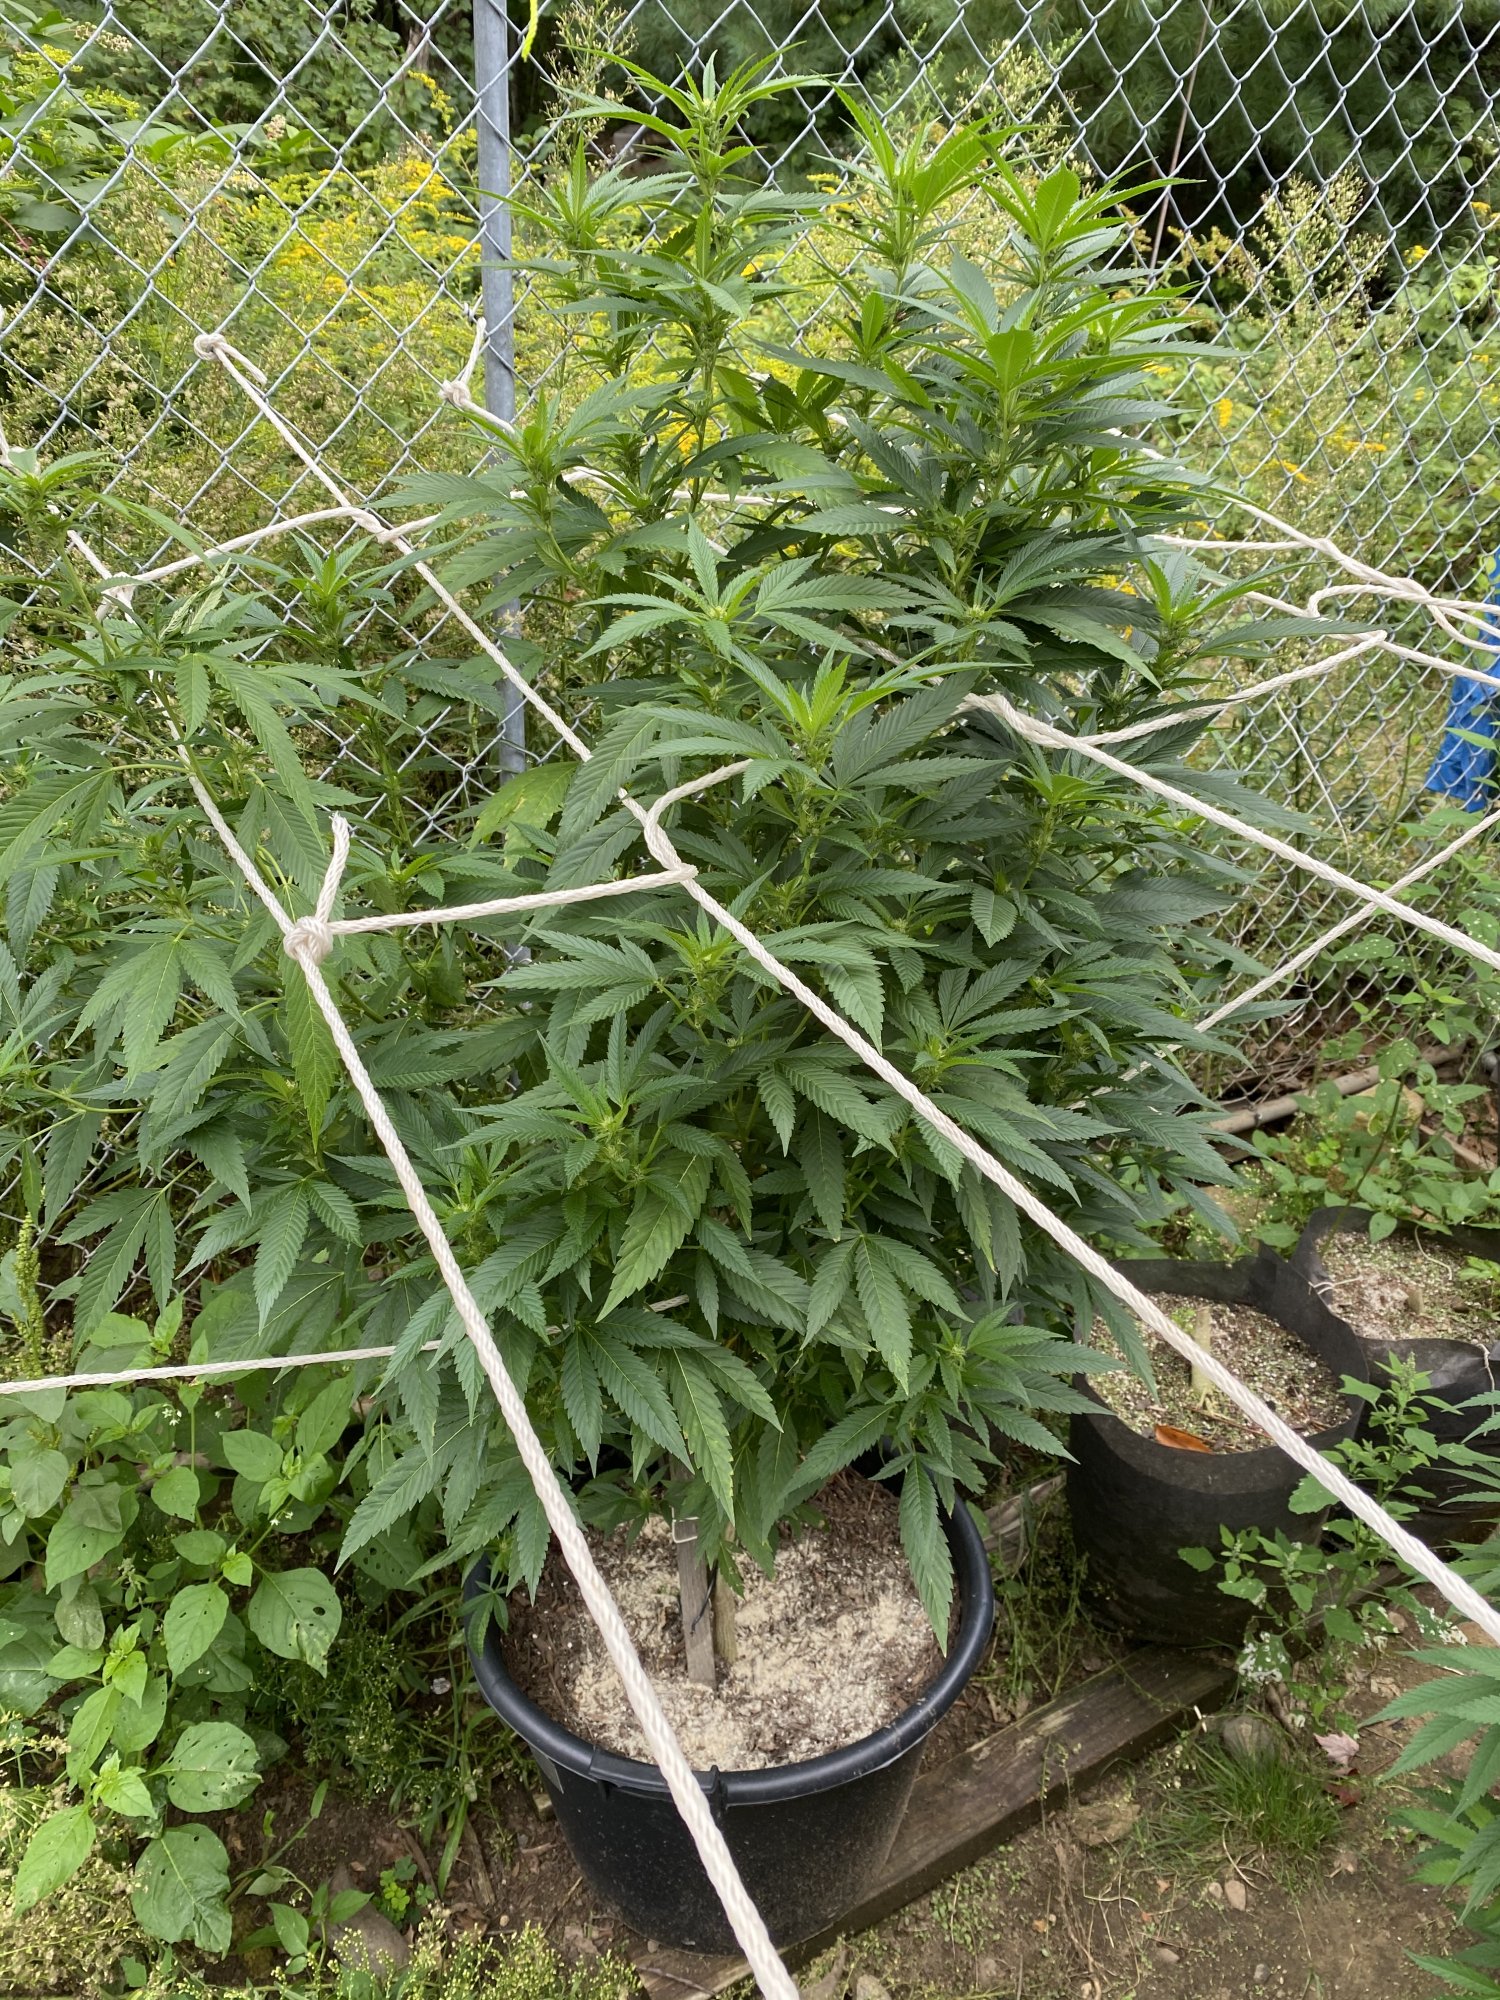 Just sharing some pics of my outdoor grow 6